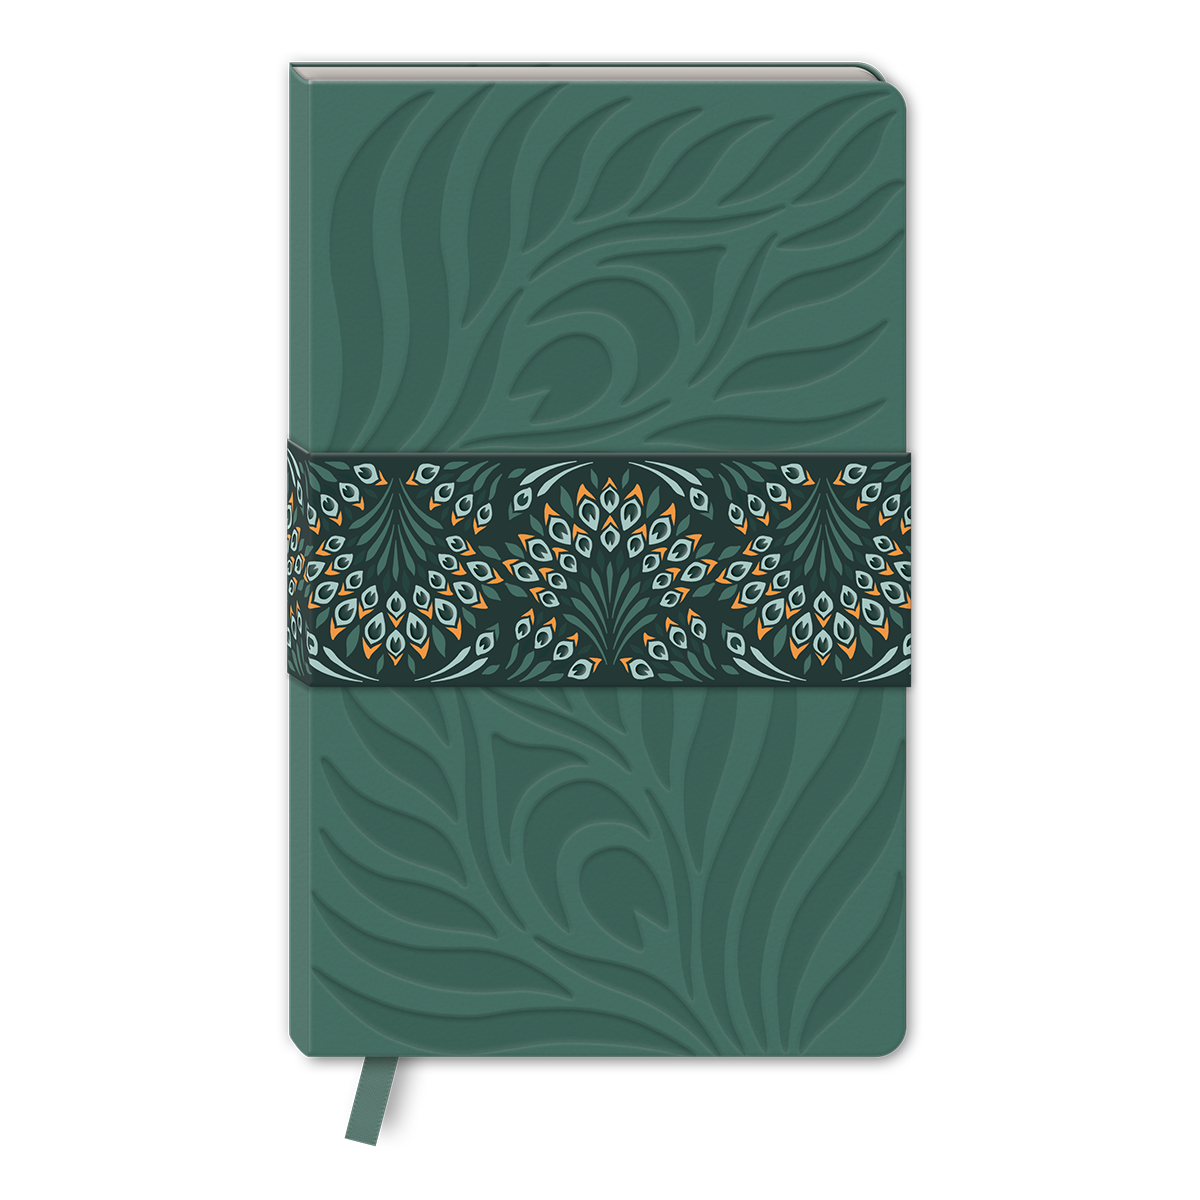 Nightshade Peacock Grid Softcover Journal Product